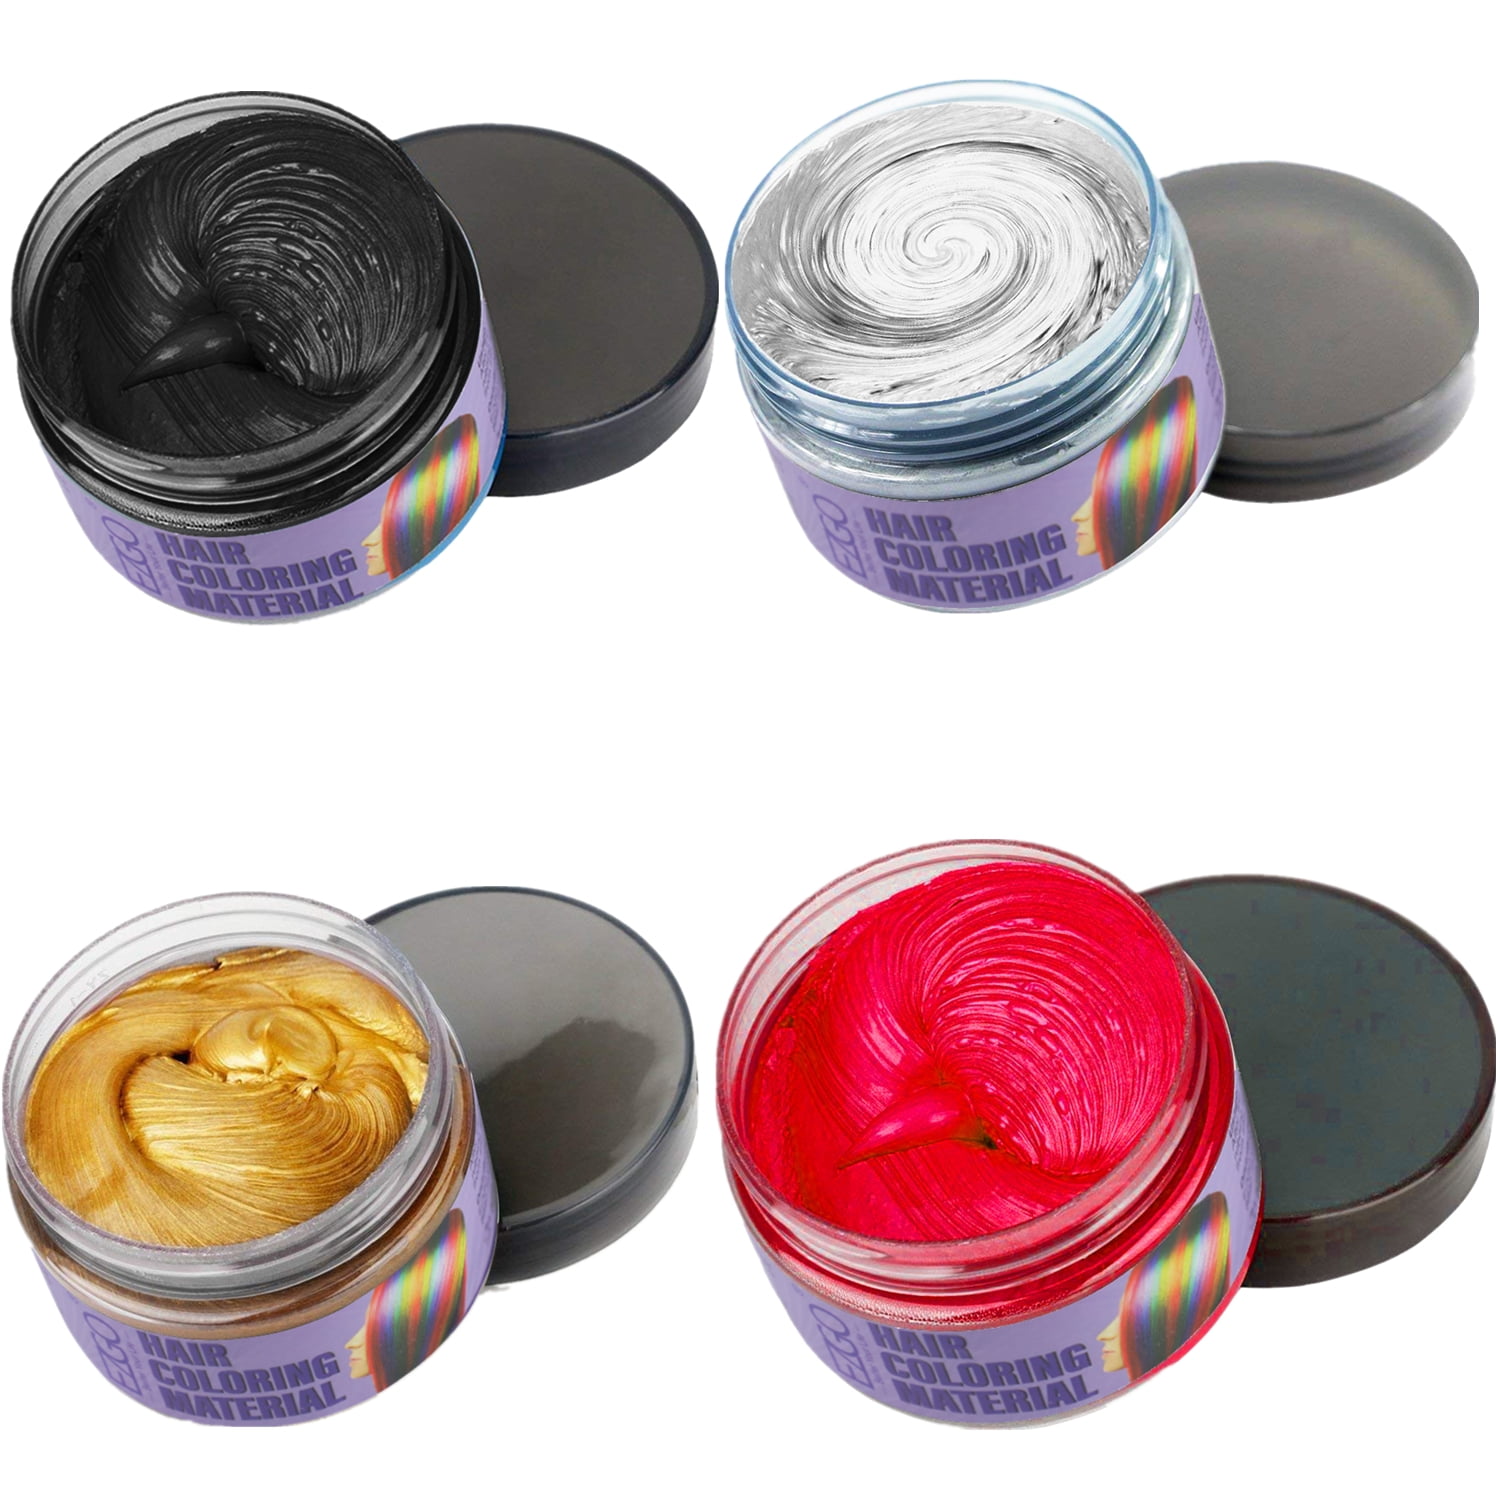 Urbanx Washable Hair Coloring Wax Material Unisex Color Dye Styling Cream Natural Hairstyle for Boys Pomade Temporary Party Cosplay Natural